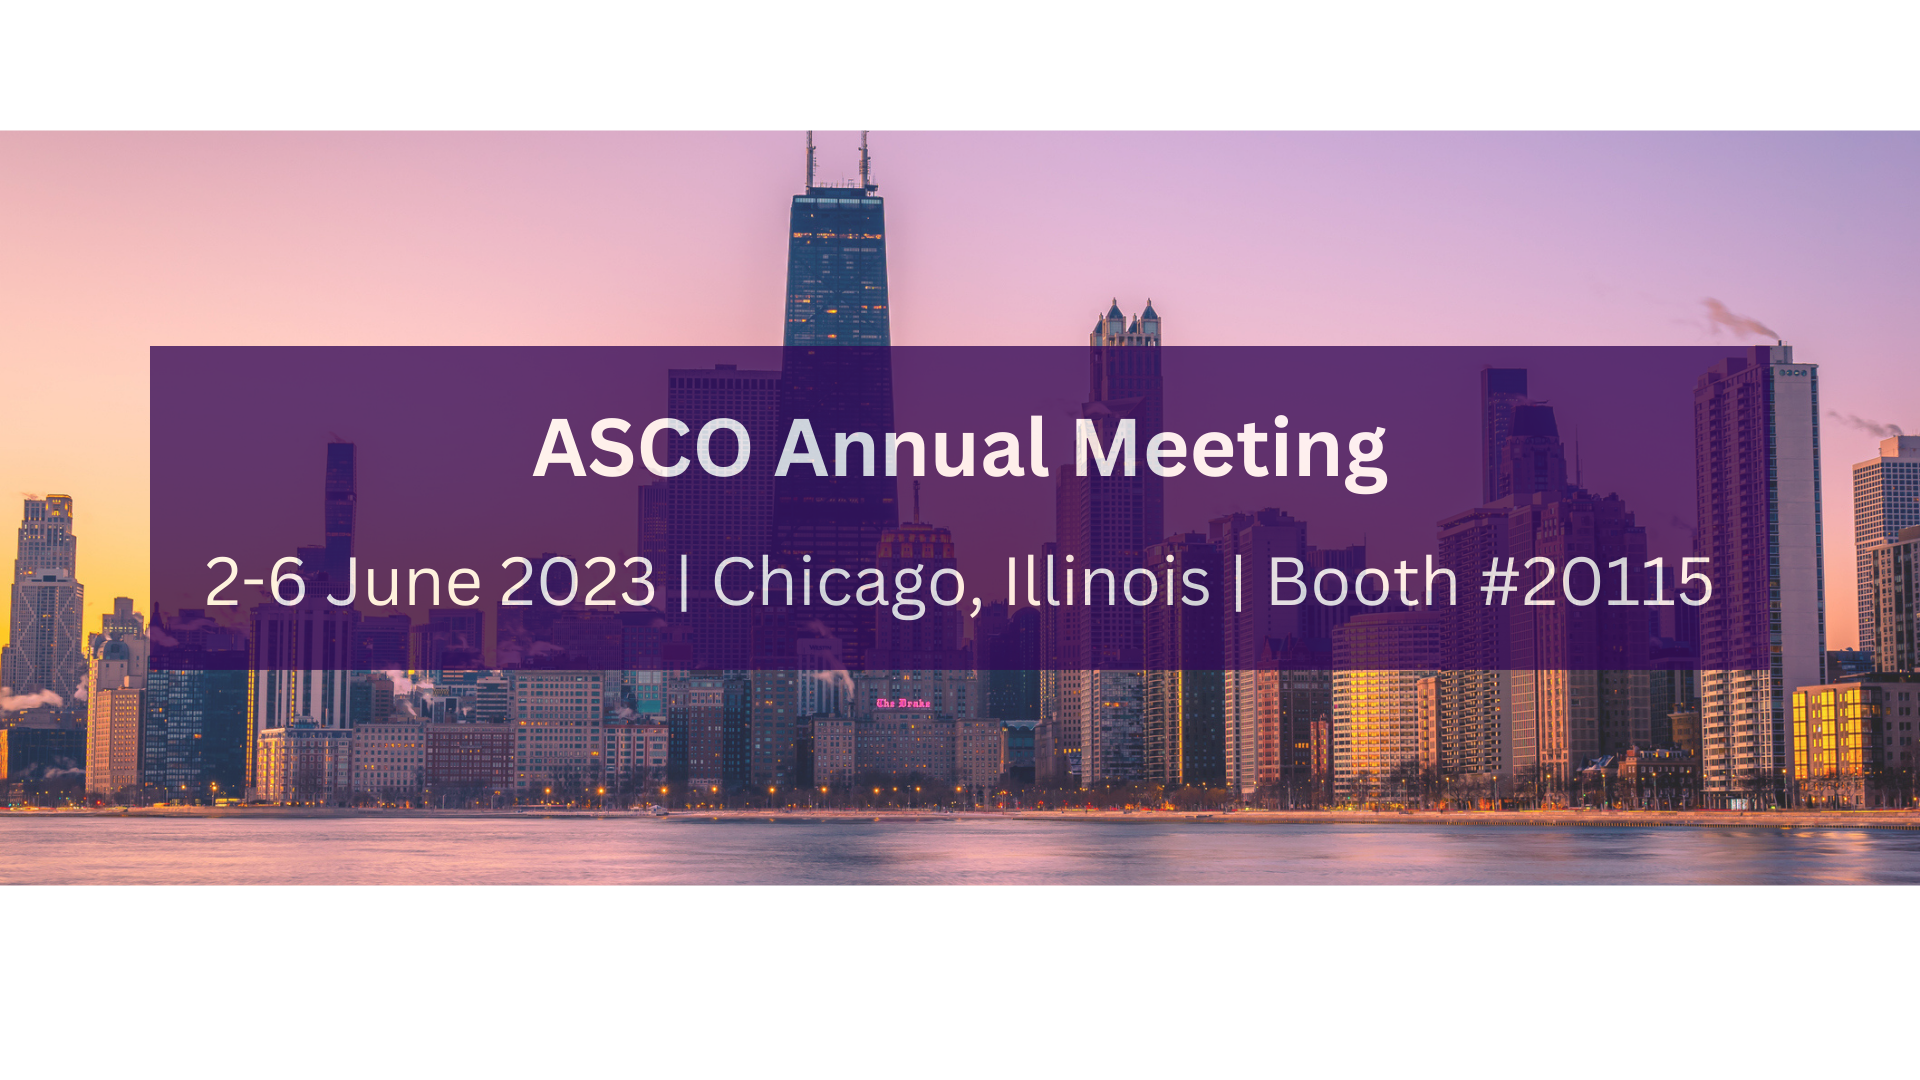 ASCO Annual Meeting 2-6 June 2023 | Chicago, Illinois | Booth #20115